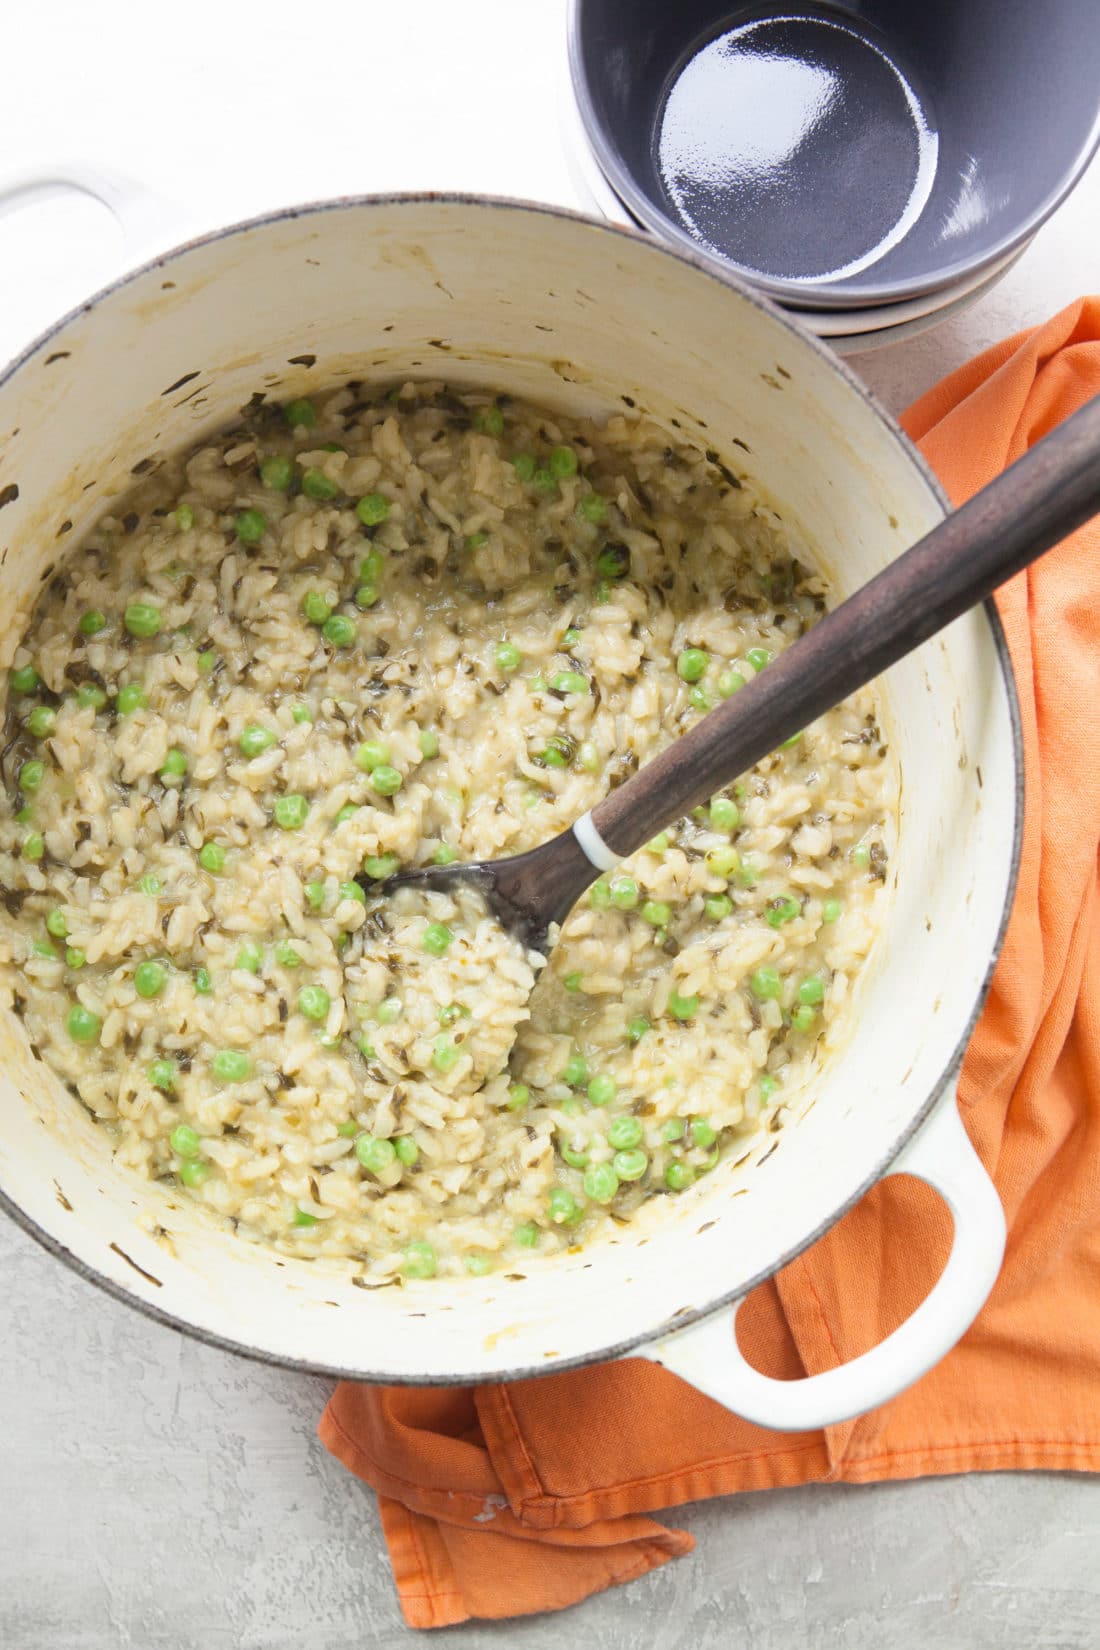 Spring Ramp and Pea Risotto / Photo by Kerri Brewer / Katie Workman / themom100.com